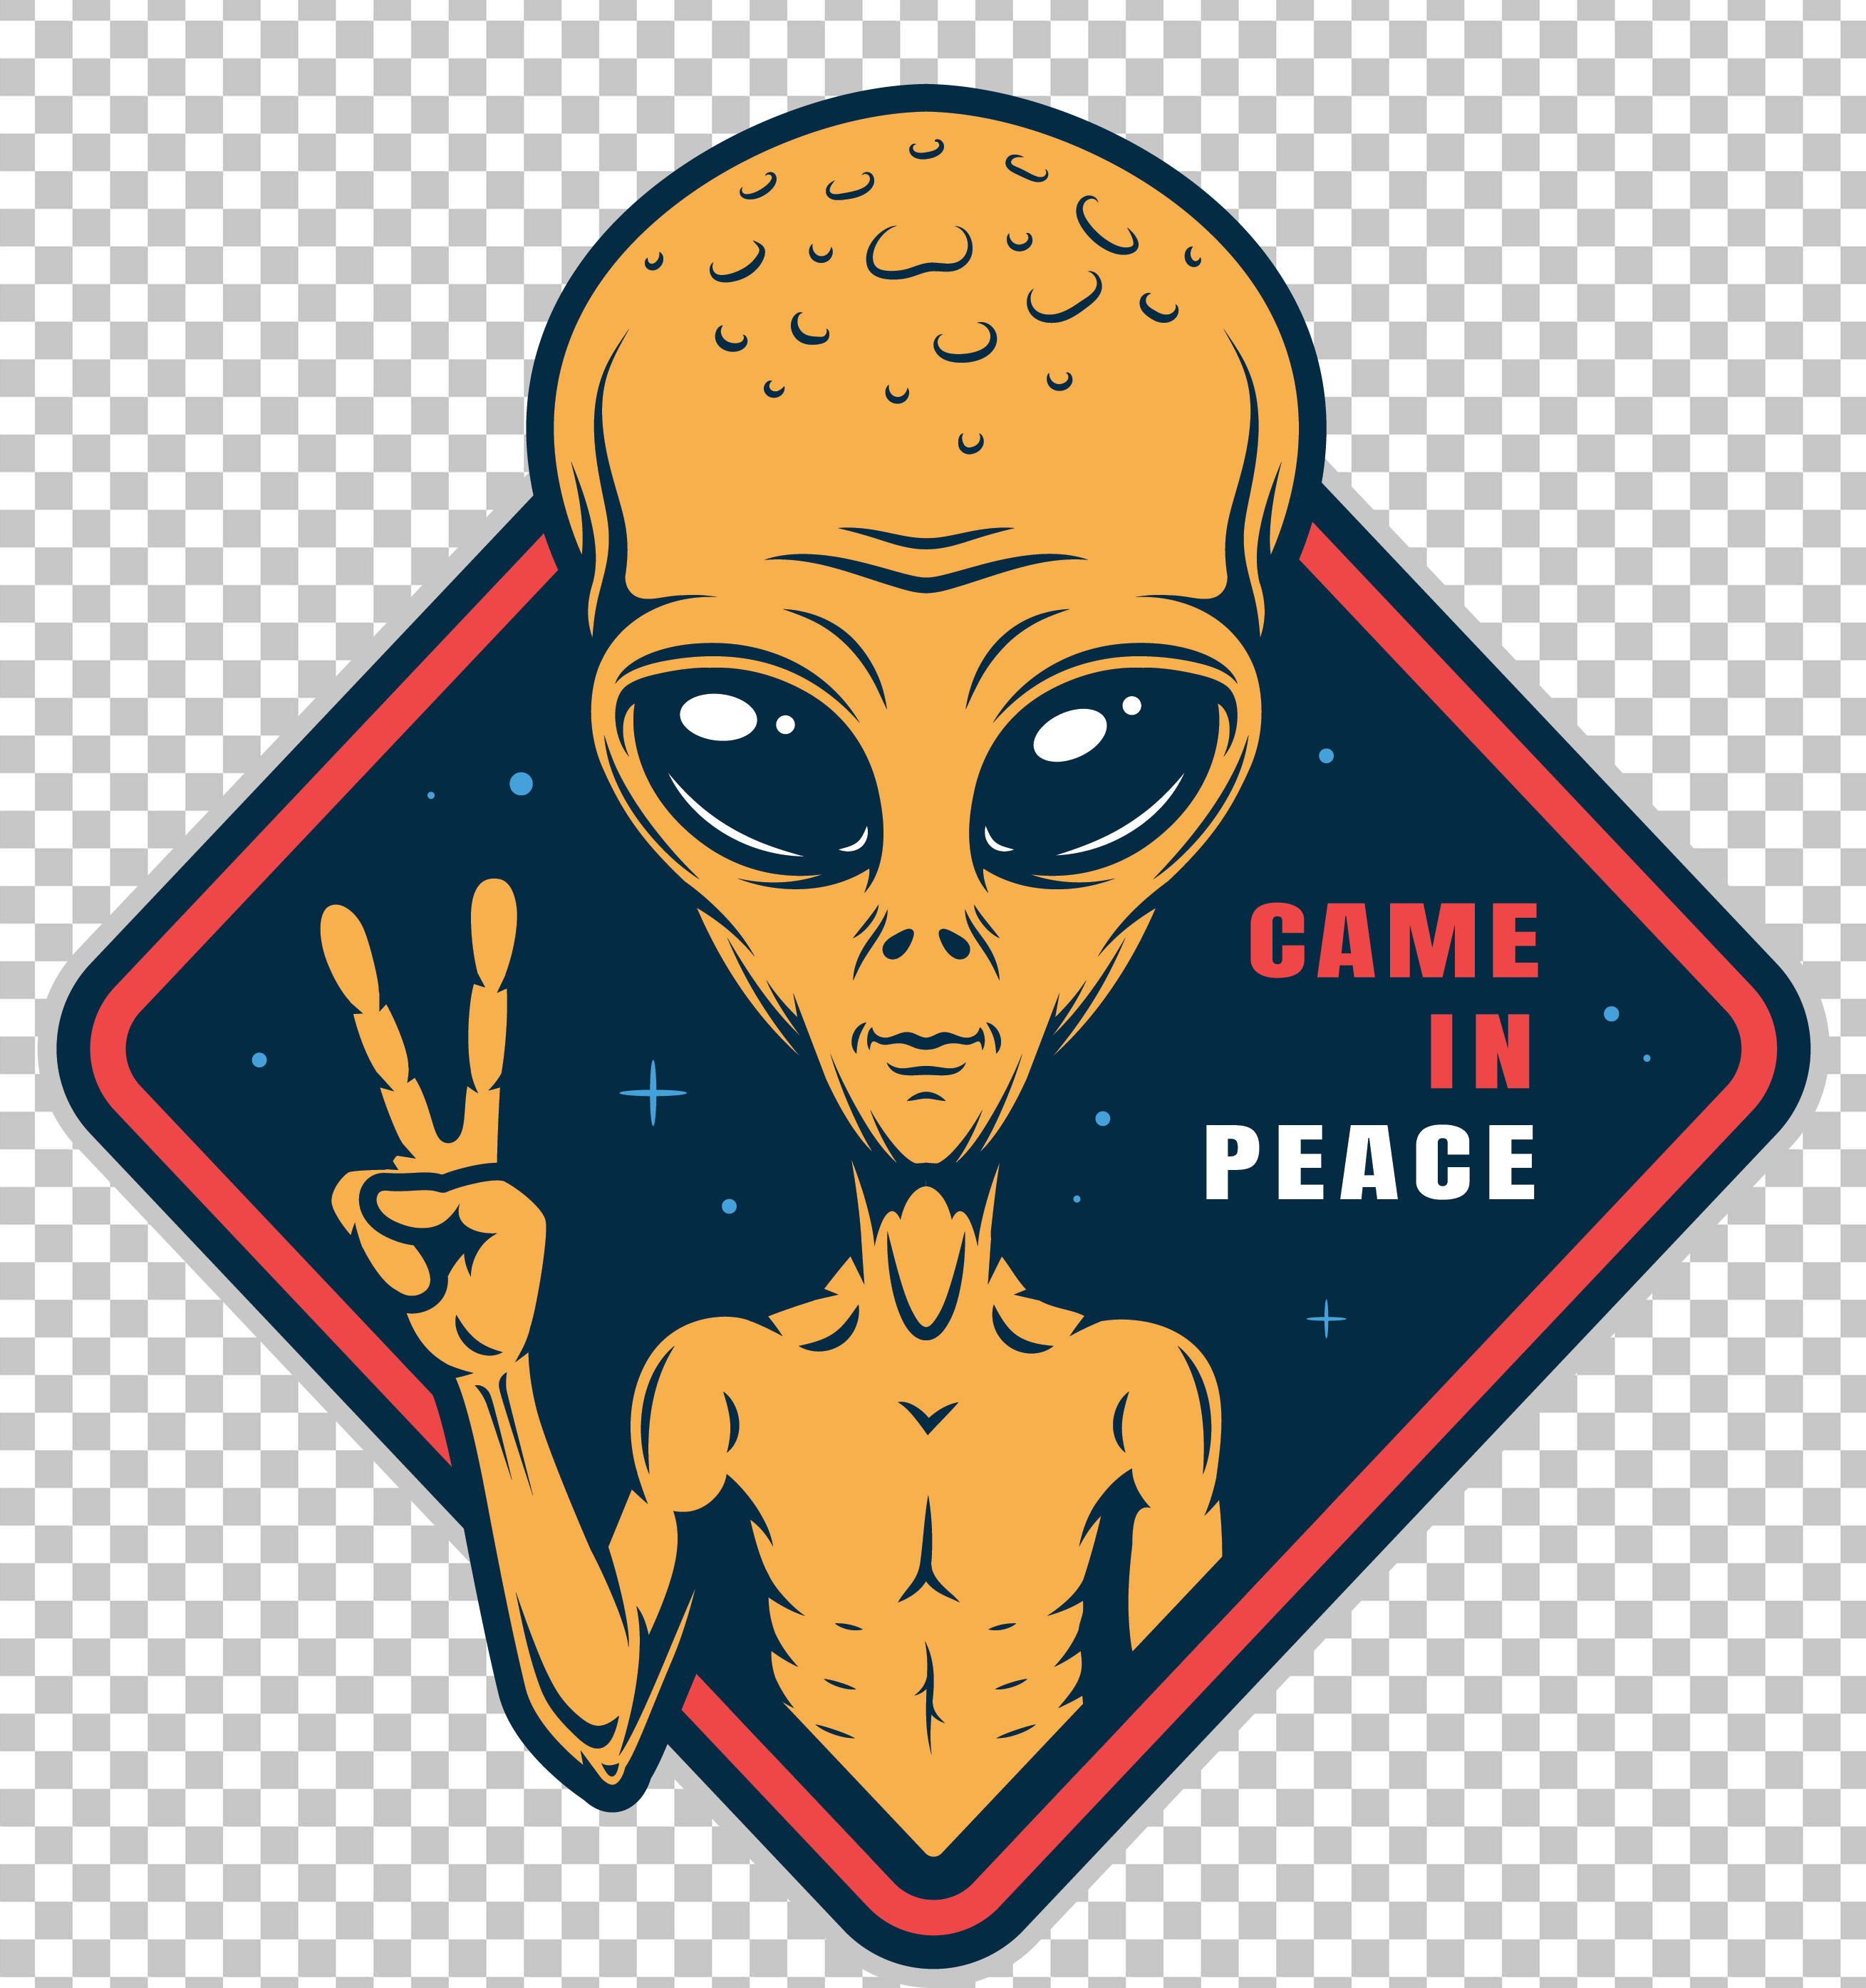 Yellow alien making peace sign with transparent image